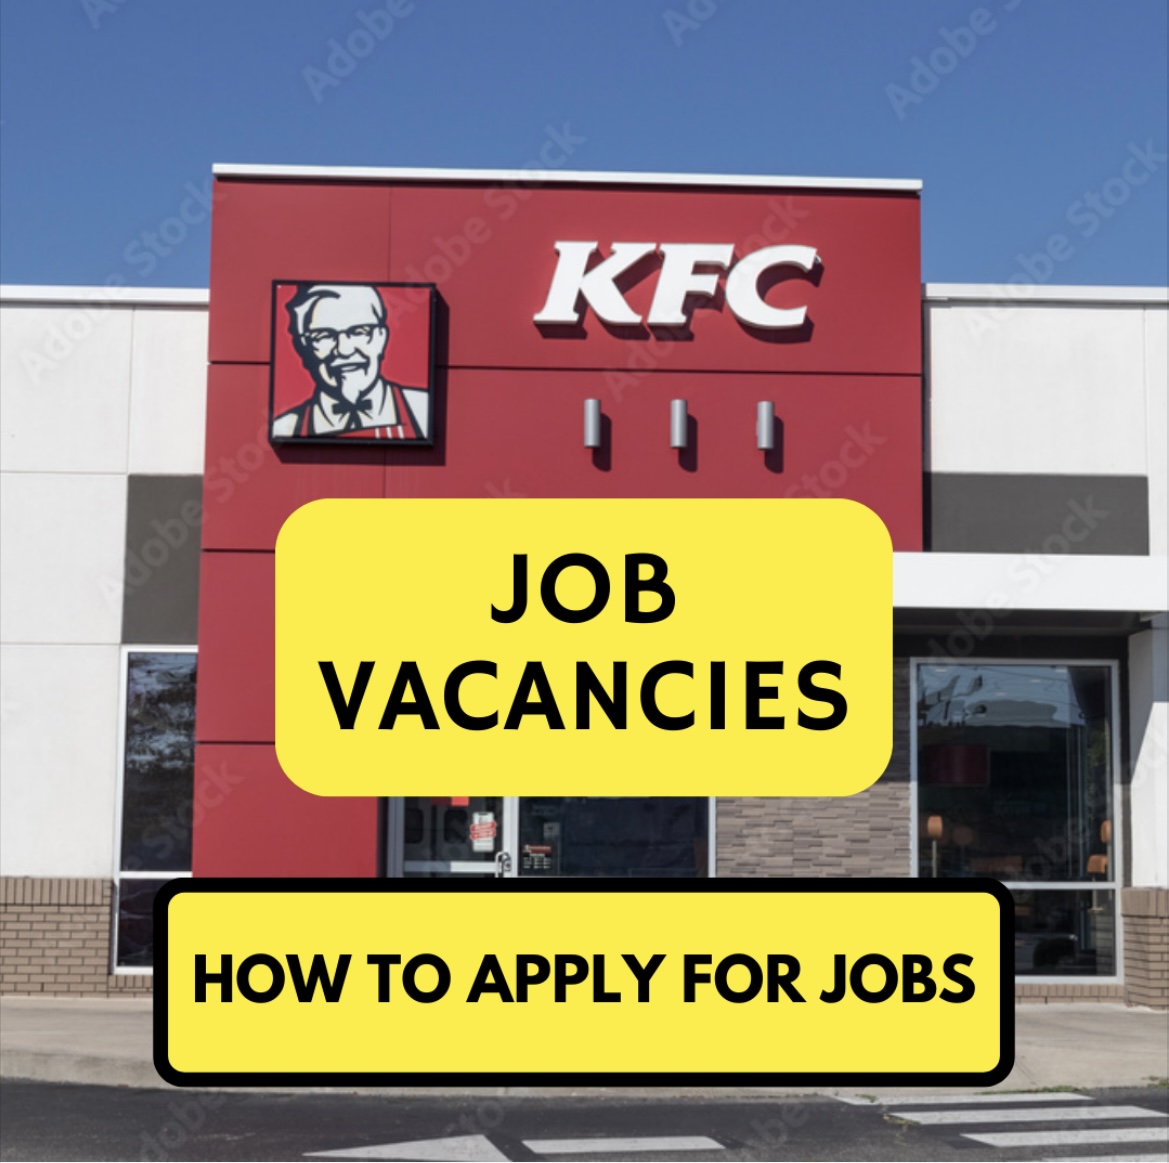 KFC Career Opportunities- Learn how to apply for vacancies online